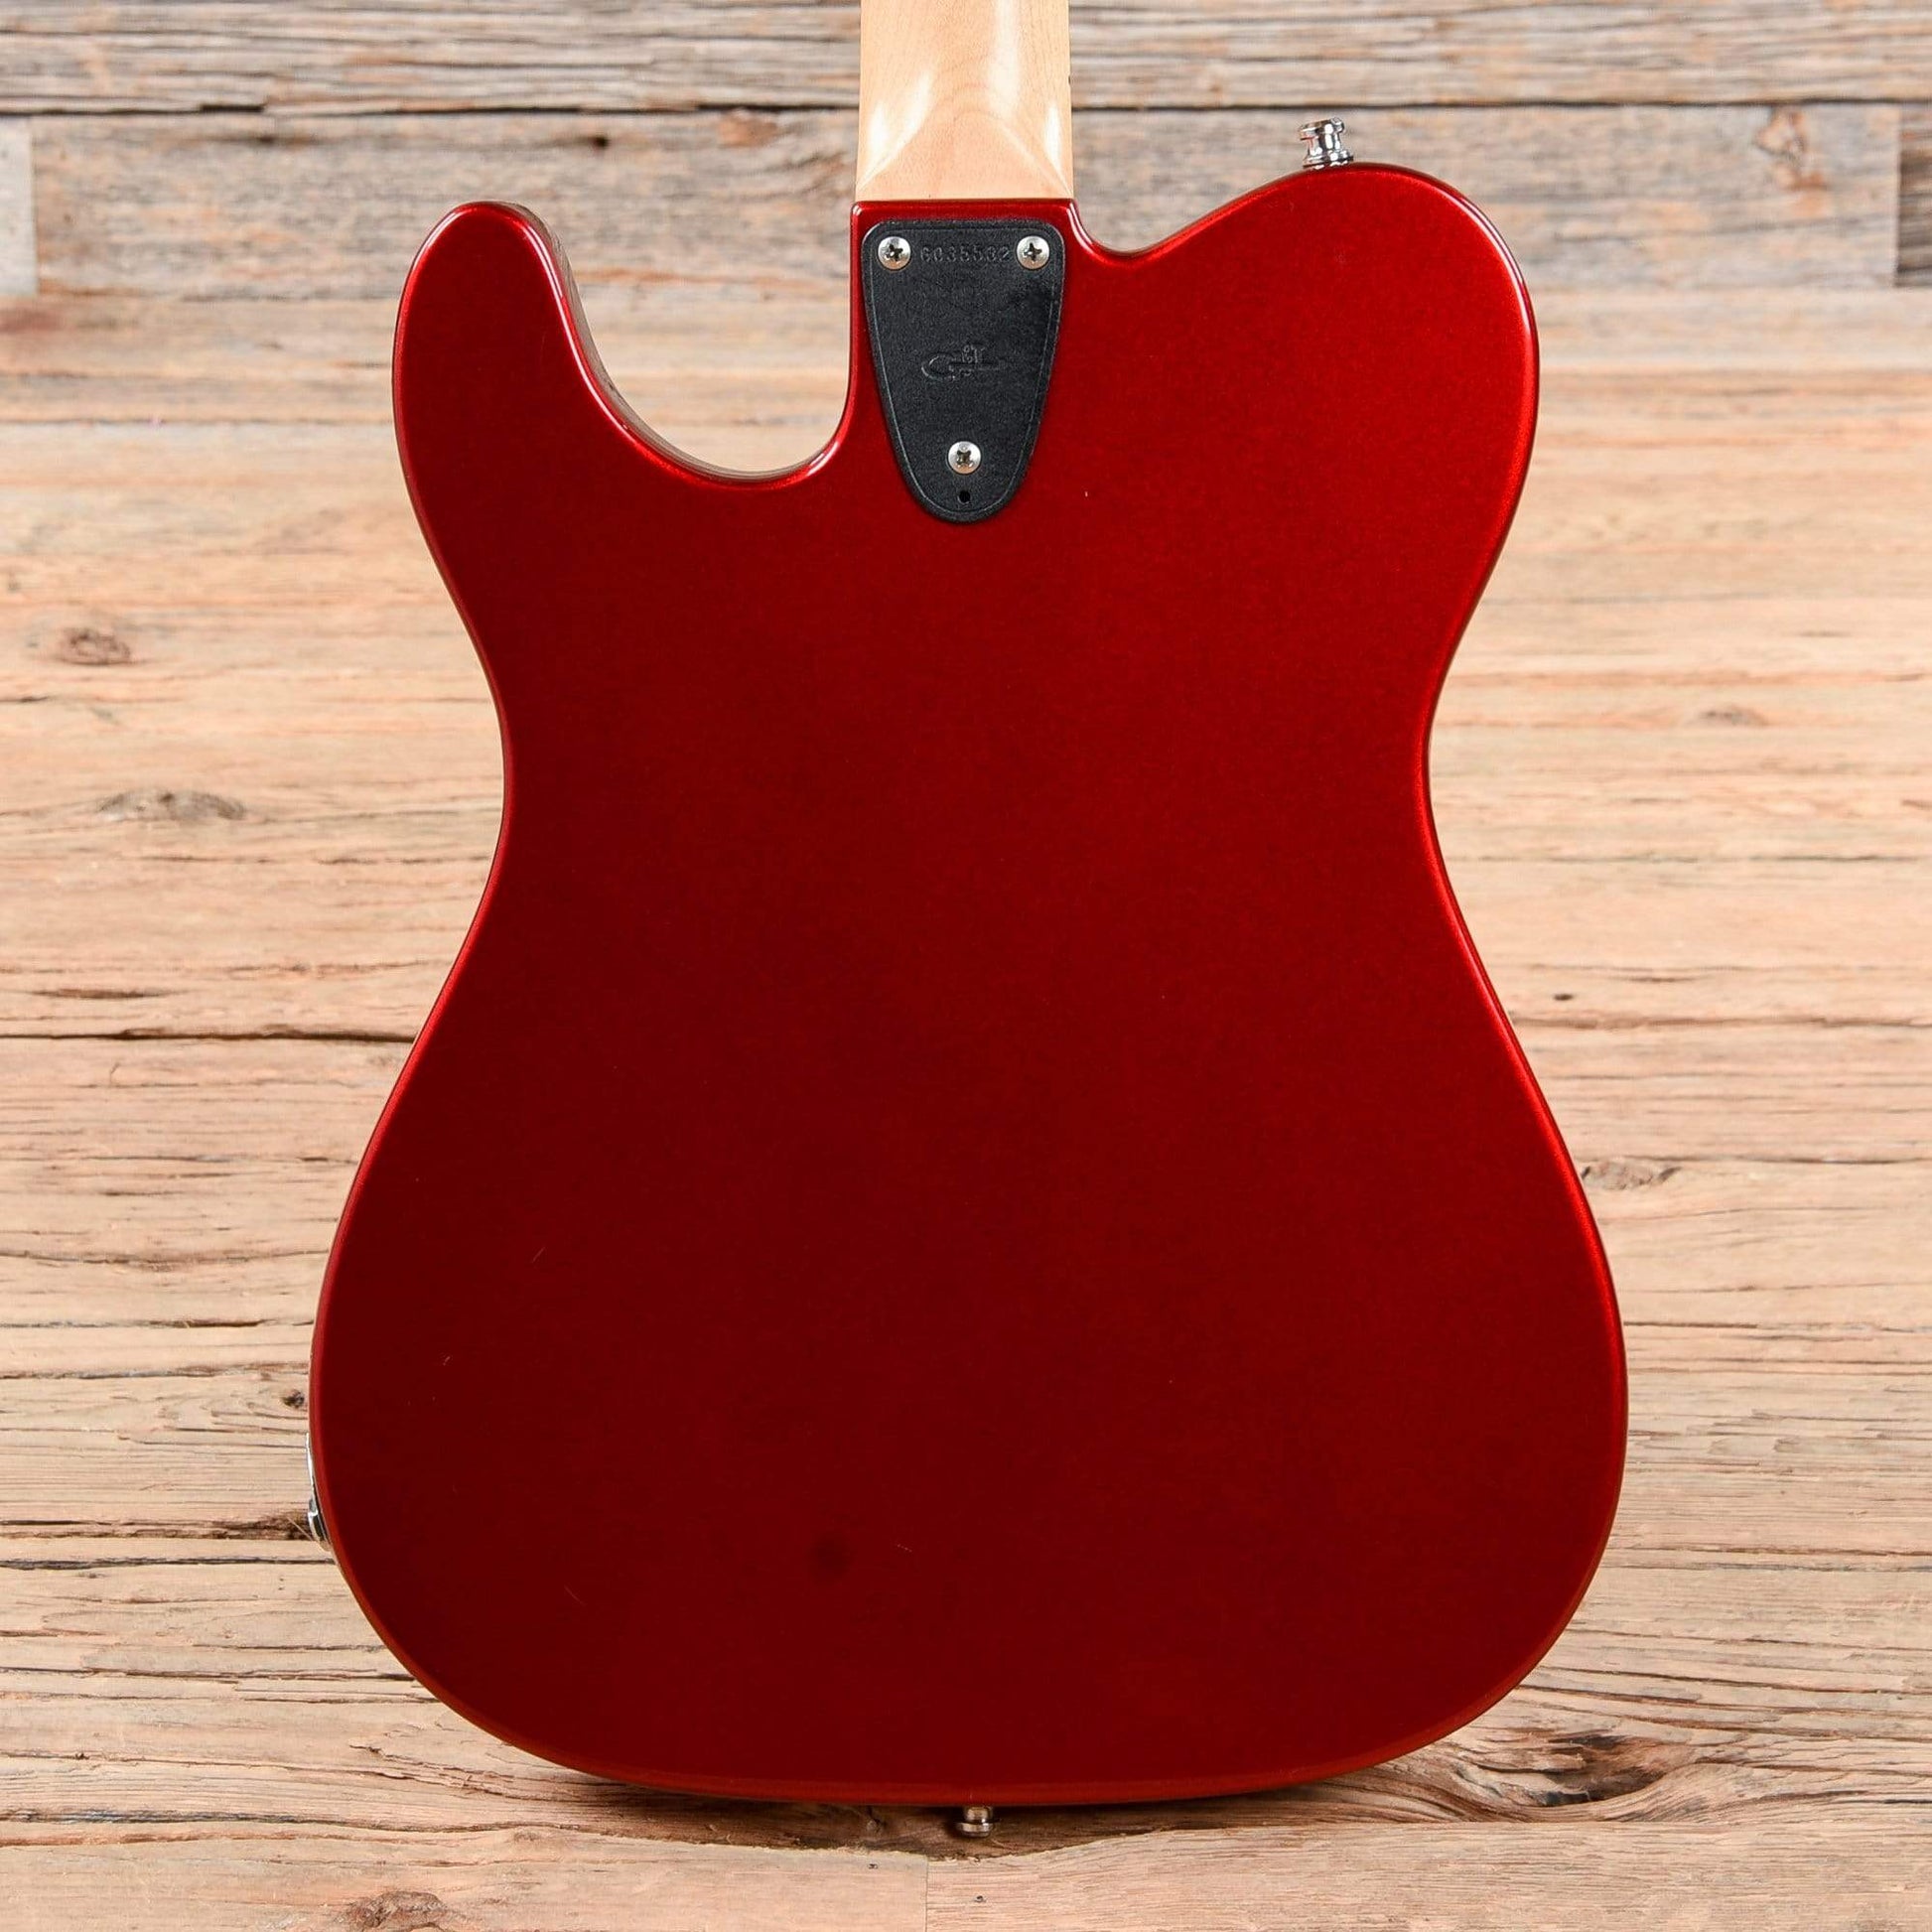 G&L ASAT Candy Apple Red Electric Guitars / Solid Body